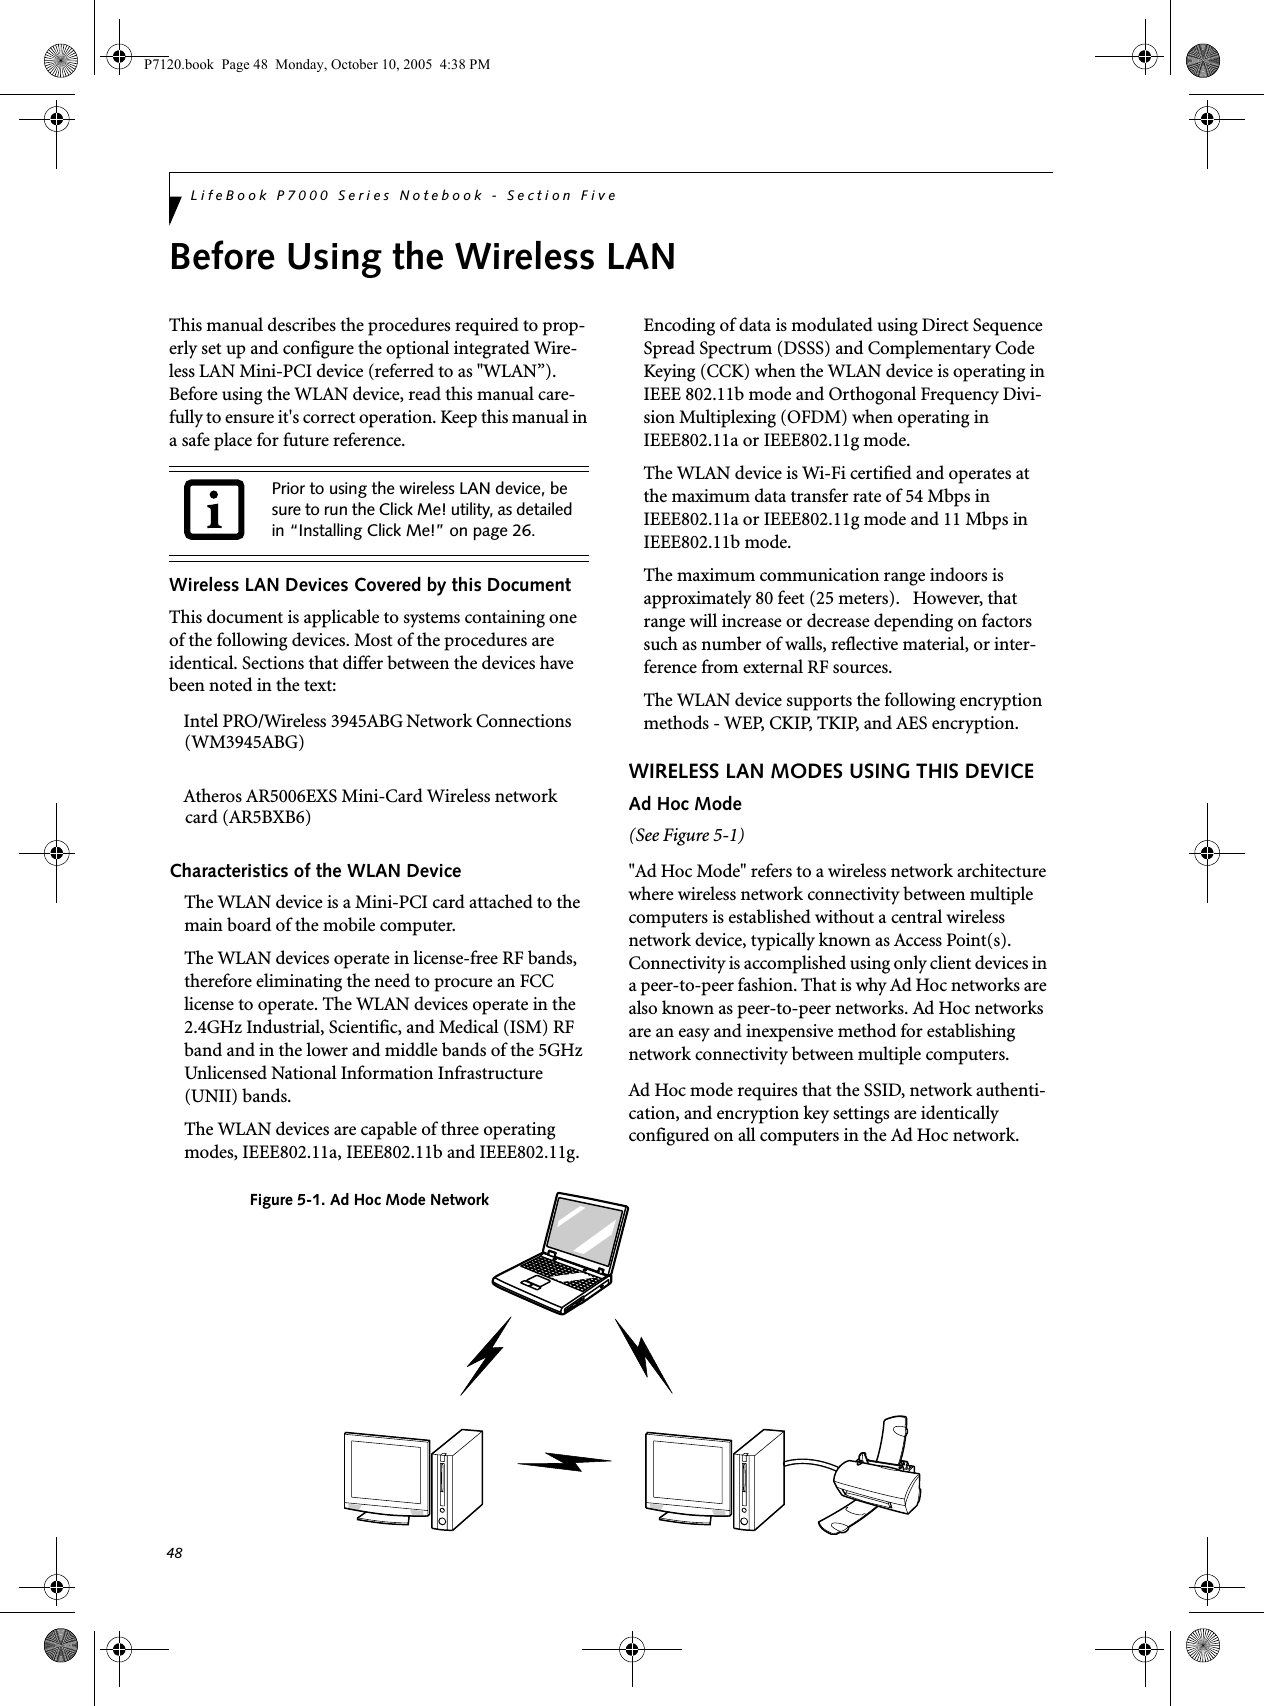 48LifeBook P7000 Series Notebook - Section FiveBefore Using the Wireless LANThis manual describes the procedures required to prop-erly set up and configure the optional integrated Wire-less LAN Mini-PCI device (referred to as &quot;WLAN”). Before using the WLAN device, read this manual care-fully to ensure it&apos;s correct operation. Keep this manual in a safe place for future reference.Wireless LAN Devices Covered by this DocumentThis document is applicable to systems containing one of the following devices. Most of the procedures are identical. Sections that differ between the devices have been noted in the text:Intel PRO/Wireless 3945ABG Network Connections (WM3945ABG)Atheros AR5006EXS Mini-Card Wireless network   card (AR5BXB6) Characteristics of the WLAN DeviceThe WLAN device is a Mini-PCI card attached to the main board of the mobile computer. The WLAN devices operate in license-free RF bands, therefore eliminating the need to procure an FCC license to operate. The WLAN devices operate in the 2.4GHz Industrial, Scientific, and Medical (ISM) RF band and in the lower and middle bands of the 5GHz Unlicensed National Information Infrastructure (UNII) bands. The WLAN devices are capable of three operating modes, IEEE802.11a, IEEE802.11b and IEEE802.11g. Encoding of data is modulated using Direct Sequence Spread Spectrum (DSSS) and Complementary Code Keying (CCK) when the WLAN device is operating in IEEE 802.11b mode and Orthogonal Frequency Divi-sion Multiplexing (OFDM) when operating in IEEE802.11a or IEEE802.11g mode. The WLAN device is Wi-Fi certified and operates at the maximum data transfer rate of 54 Mbps in IEEE802.11a or IEEE802.11g mode and 11 Mbps in IEEE802.11b mode.The maximum communication range indoors is approximately 80 feet (25 meters).   However, that range will increase or decrease depending on factors such as number of walls, reflective material, or inter-ference from external RF sources.The WLAN device supports the following encryption methods - WEP, CKIP, TKIP, and AES encryption.WIRELESS LAN MODES USING THIS DEVICEAd Hoc Mode (See Figure 5-1)&quot;Ad Hoc Mode&quot; refers to a wireless network architecture where wireless network connectivity between multiple computers is established without a central wireless network device, typically known as Access Point(s). Connectivity is accomplished using only client devices in a peer-to-peer fashion. That is why Ad Hoc networks are also known as peer-to-peer networks. Ad Hoc networks are an easy and inexpensive method for establishing network connectivity between multiple computers.Ad Hoc mode requires that the SSID, network authenti-cation, and encryption key settings are identically configured on all computers in the Ad Hoc network. Prior to using the wireless LAN device, be sure to run the Click Me! utility, as detailed in “Installing Click Me!” on page 26.Figure 5-1. Ad Hoc Mode NetworkP7120.book  Page 48  Monday, October 10, 2005  4:38 PM